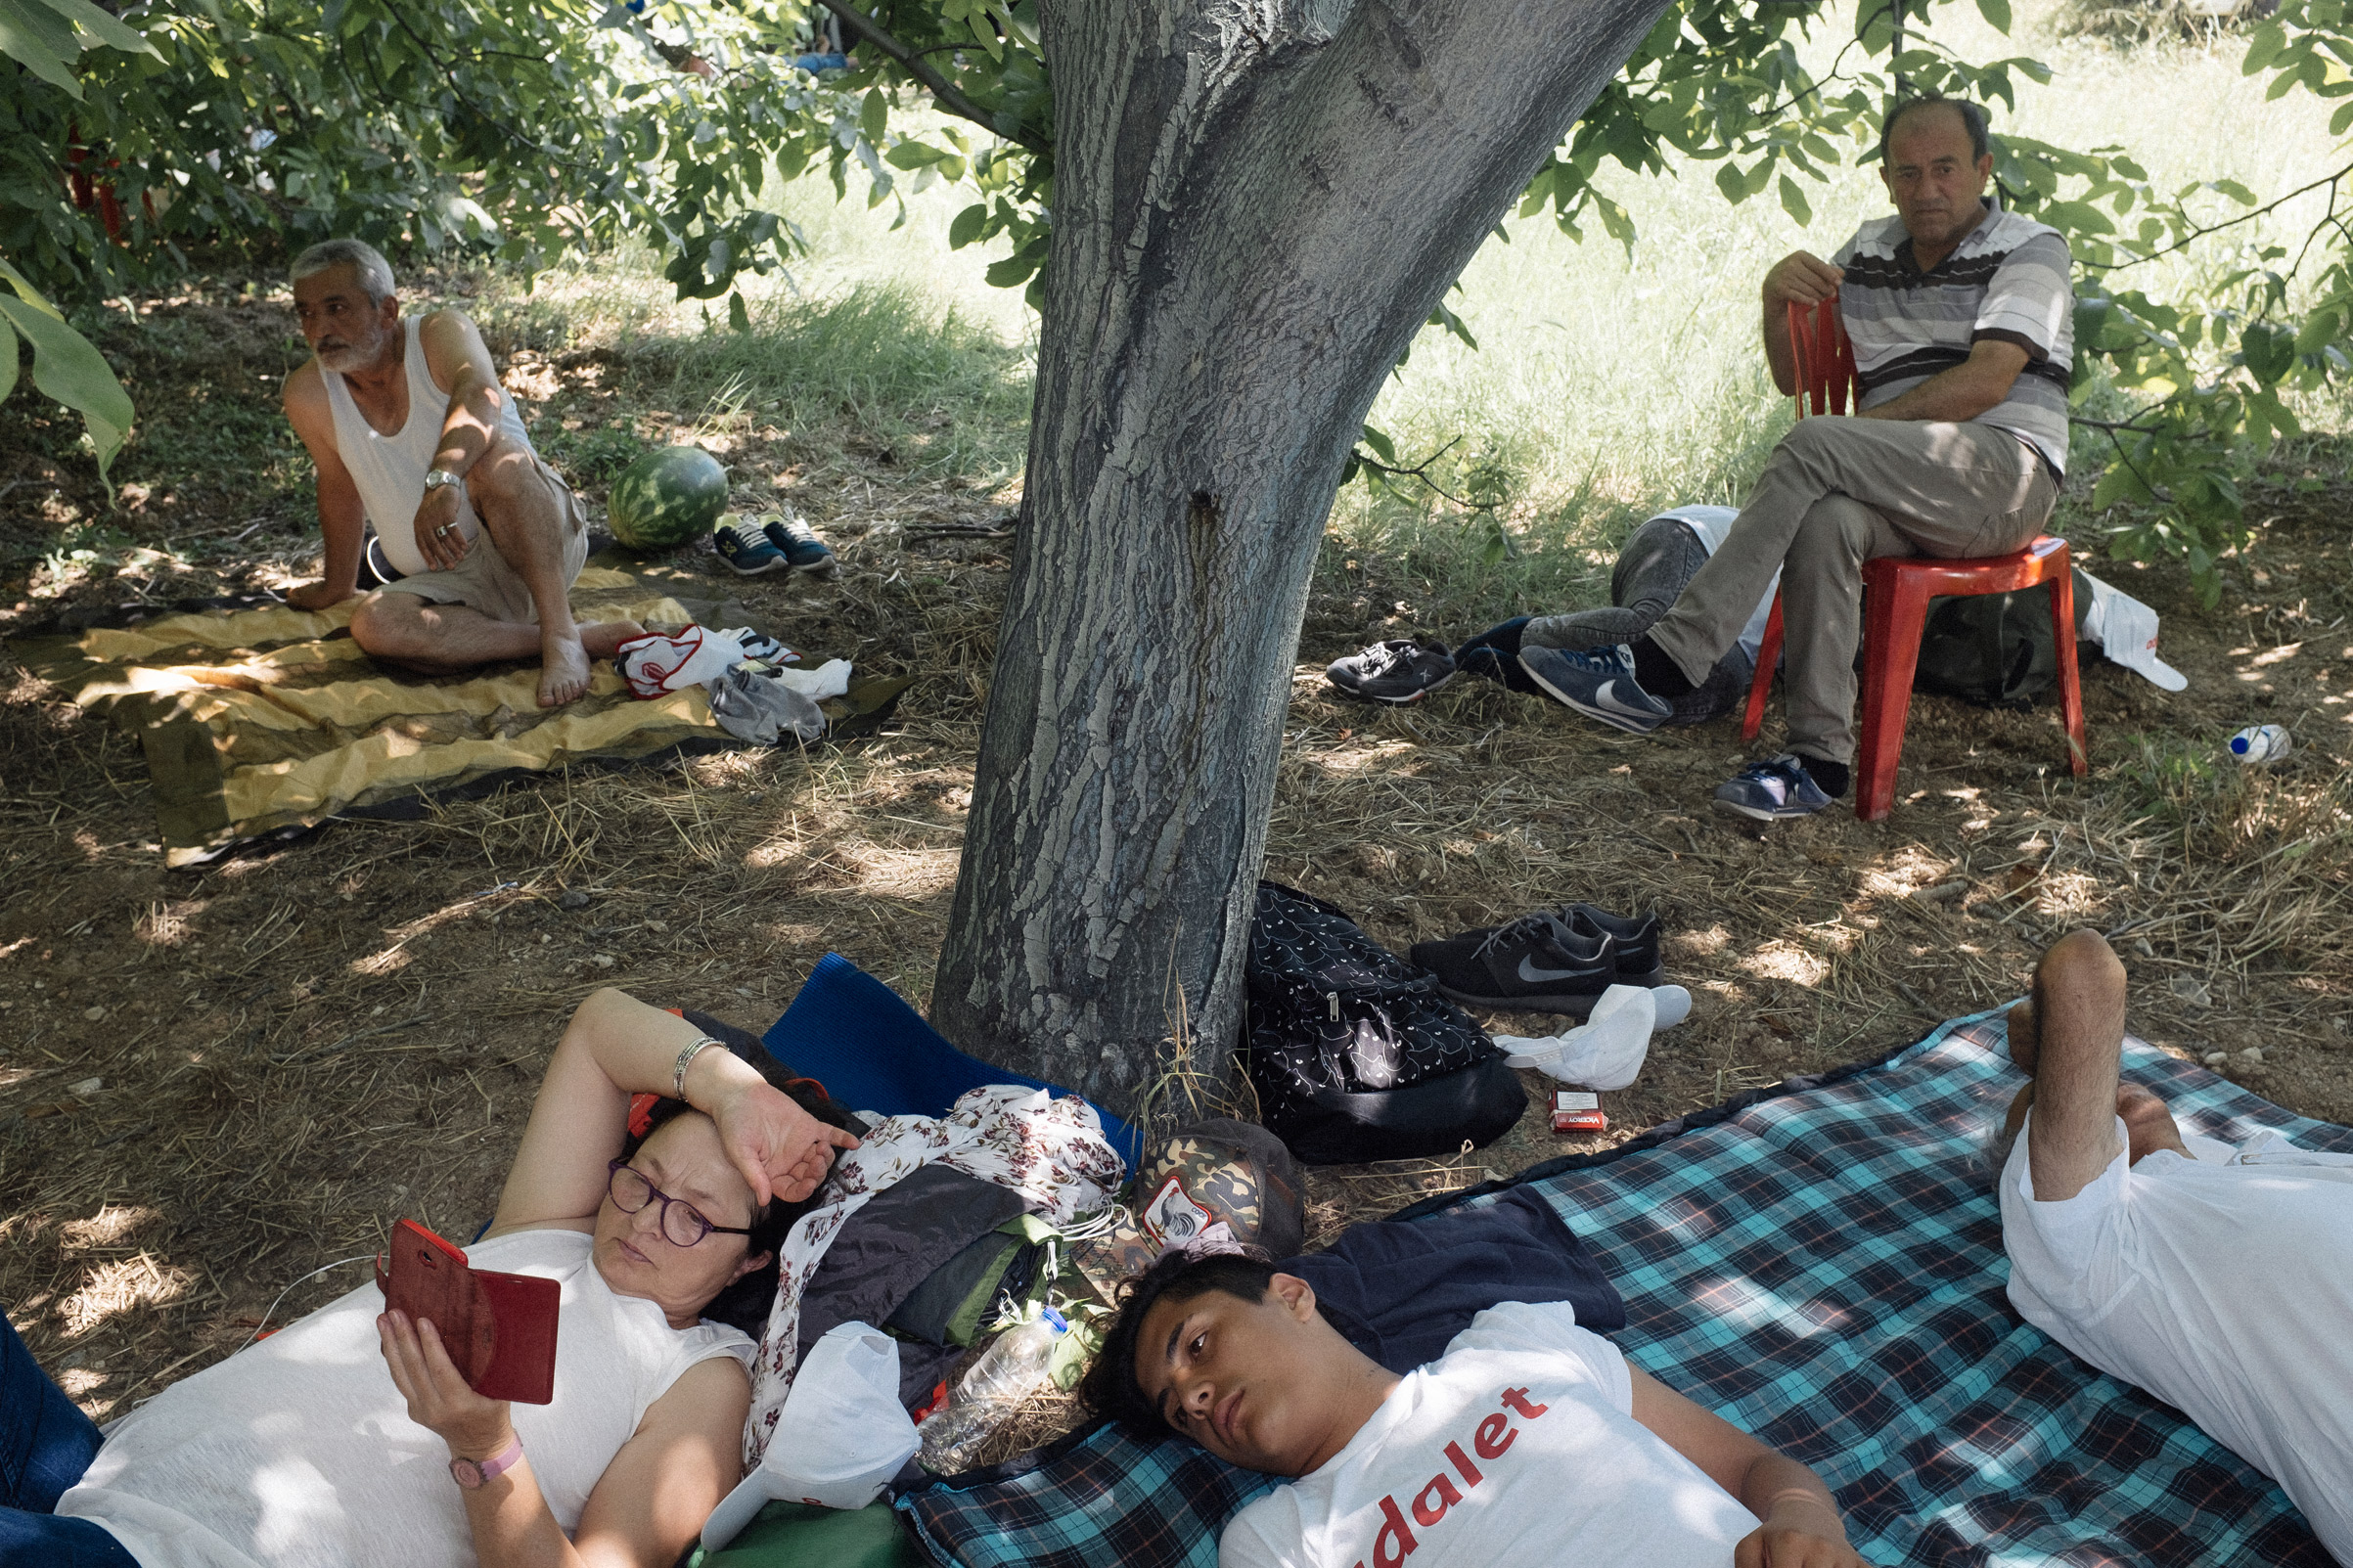 People take a break during the Justice March, Sakarya,Turkey, July 2, 2017.  Turkey has been suffering one of the most intense heat waves in a century. In this heat, thousands of people walk in shifts, led by the main opposition Republican People’s Party (CHP) leader Kemal Kilicdaroglu.